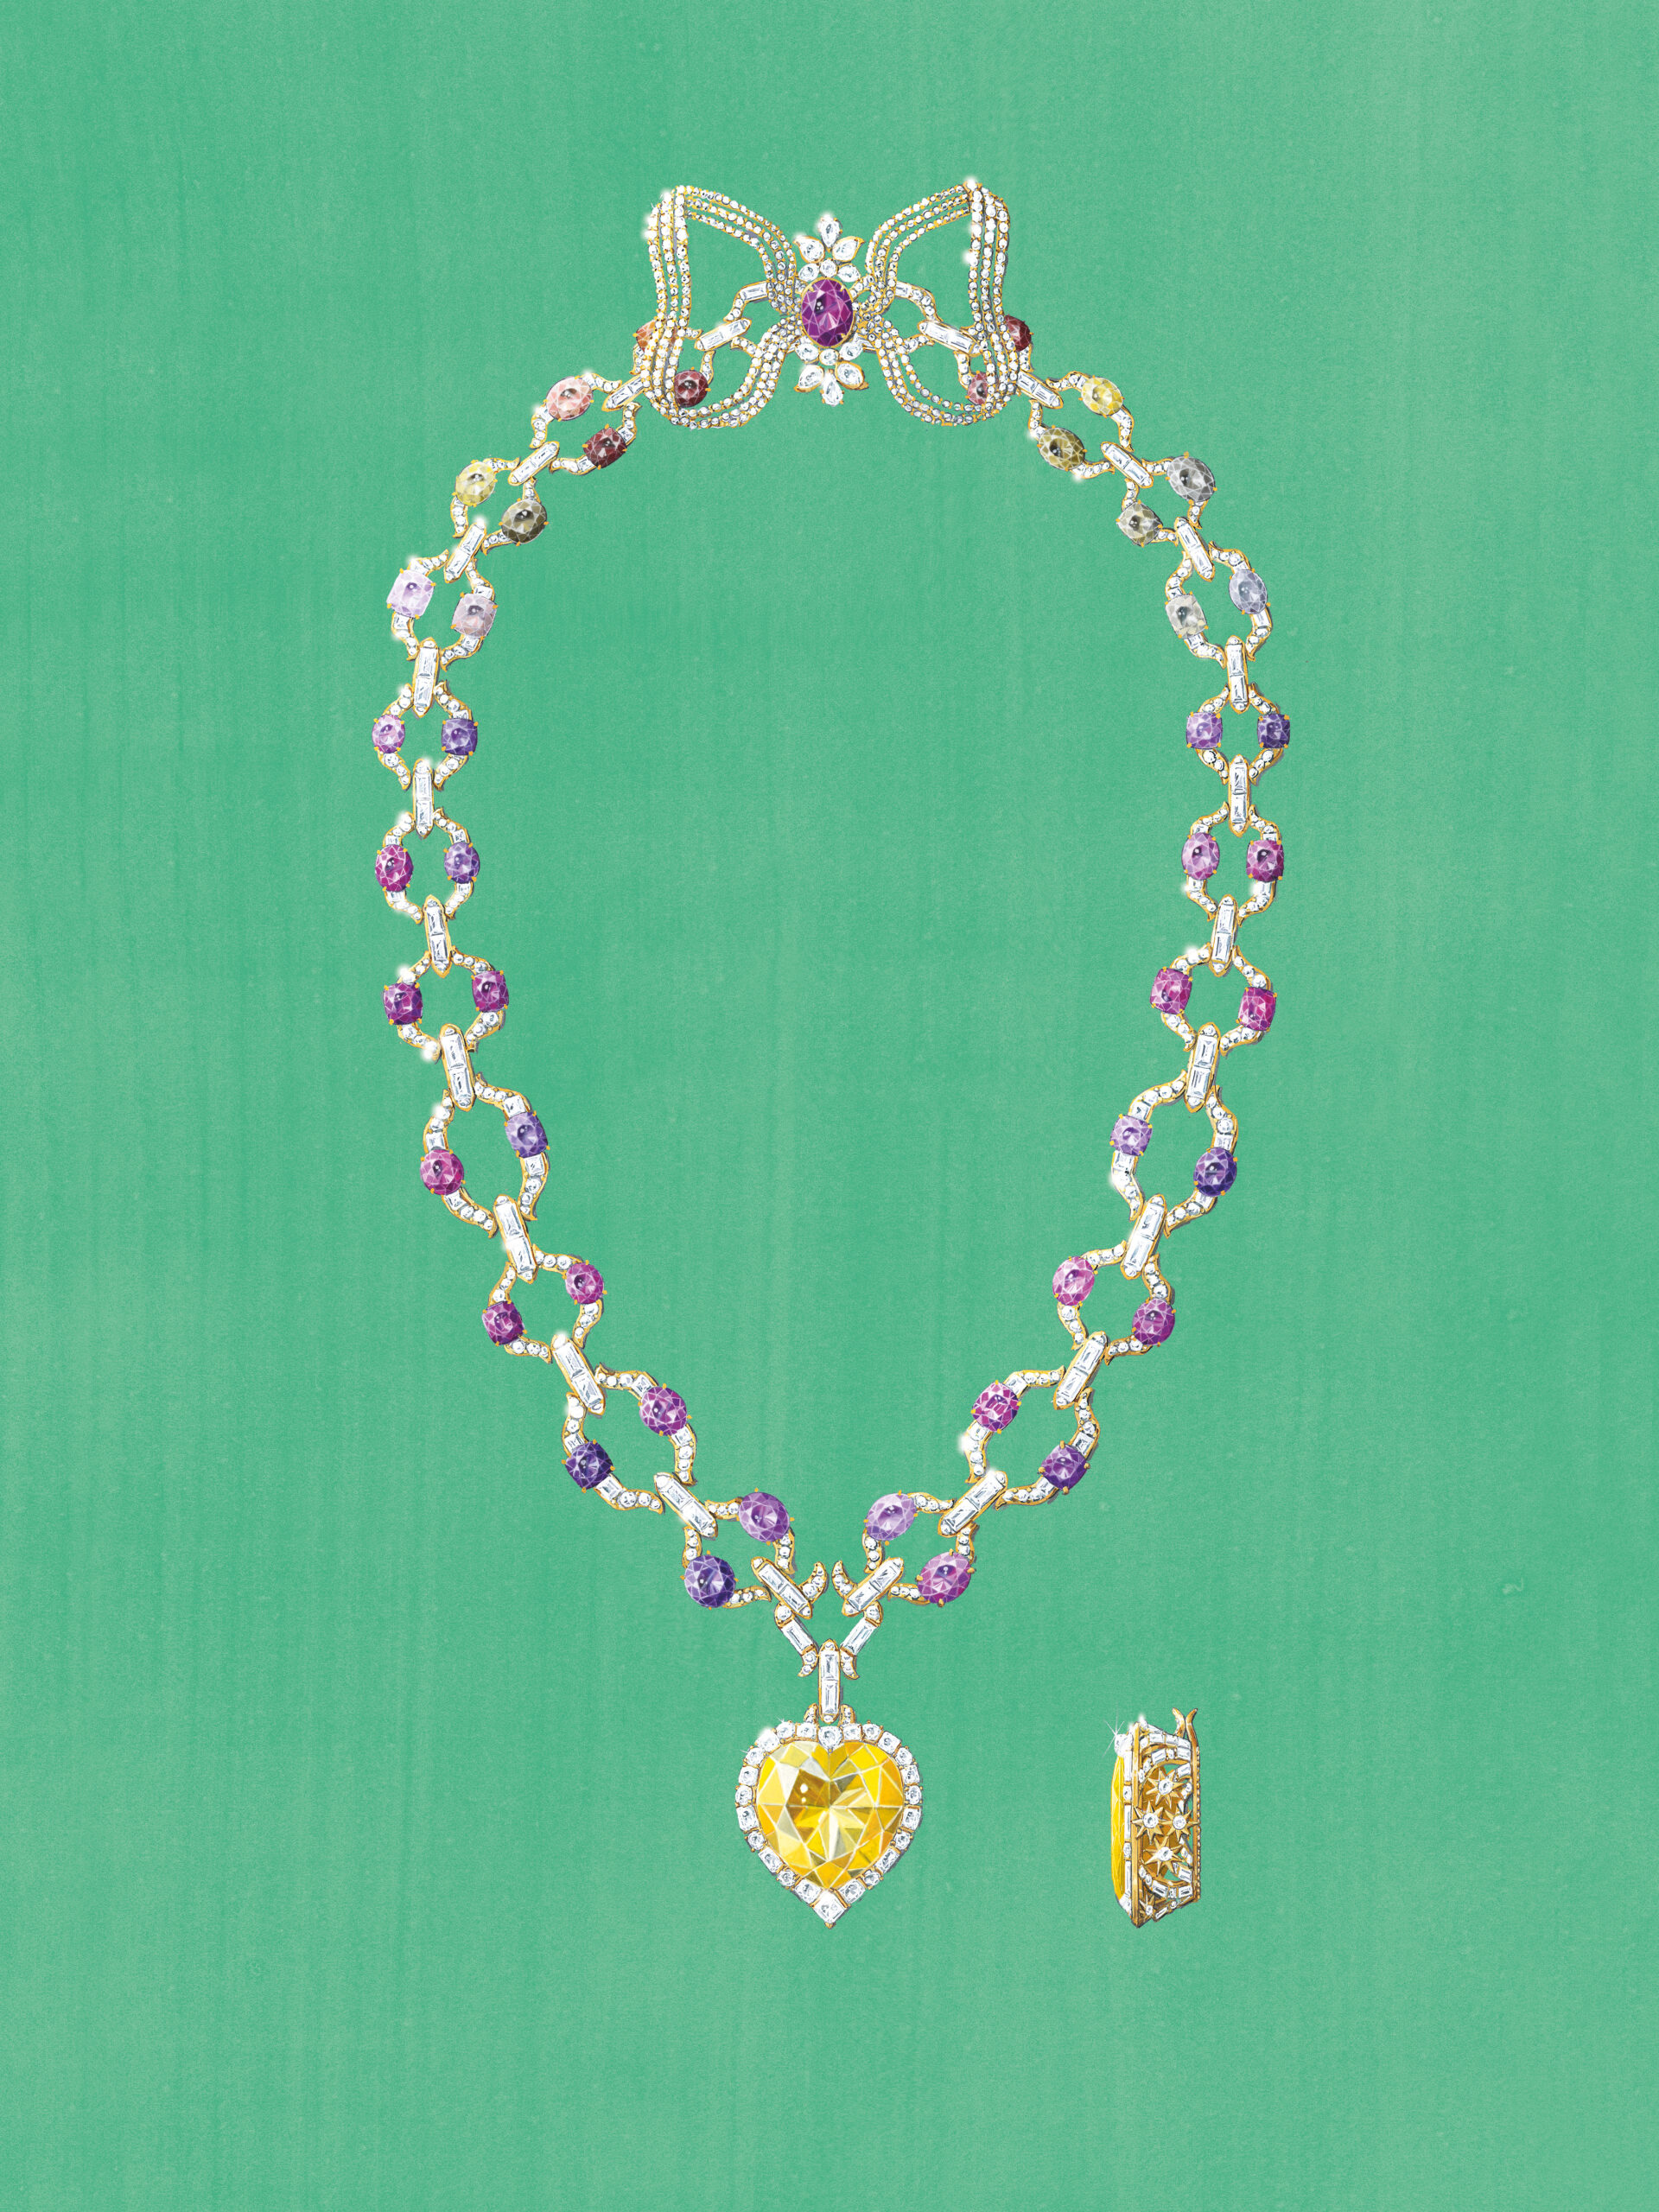 Gucci Presents “Allegoria”, The House's Latest High Jewelry